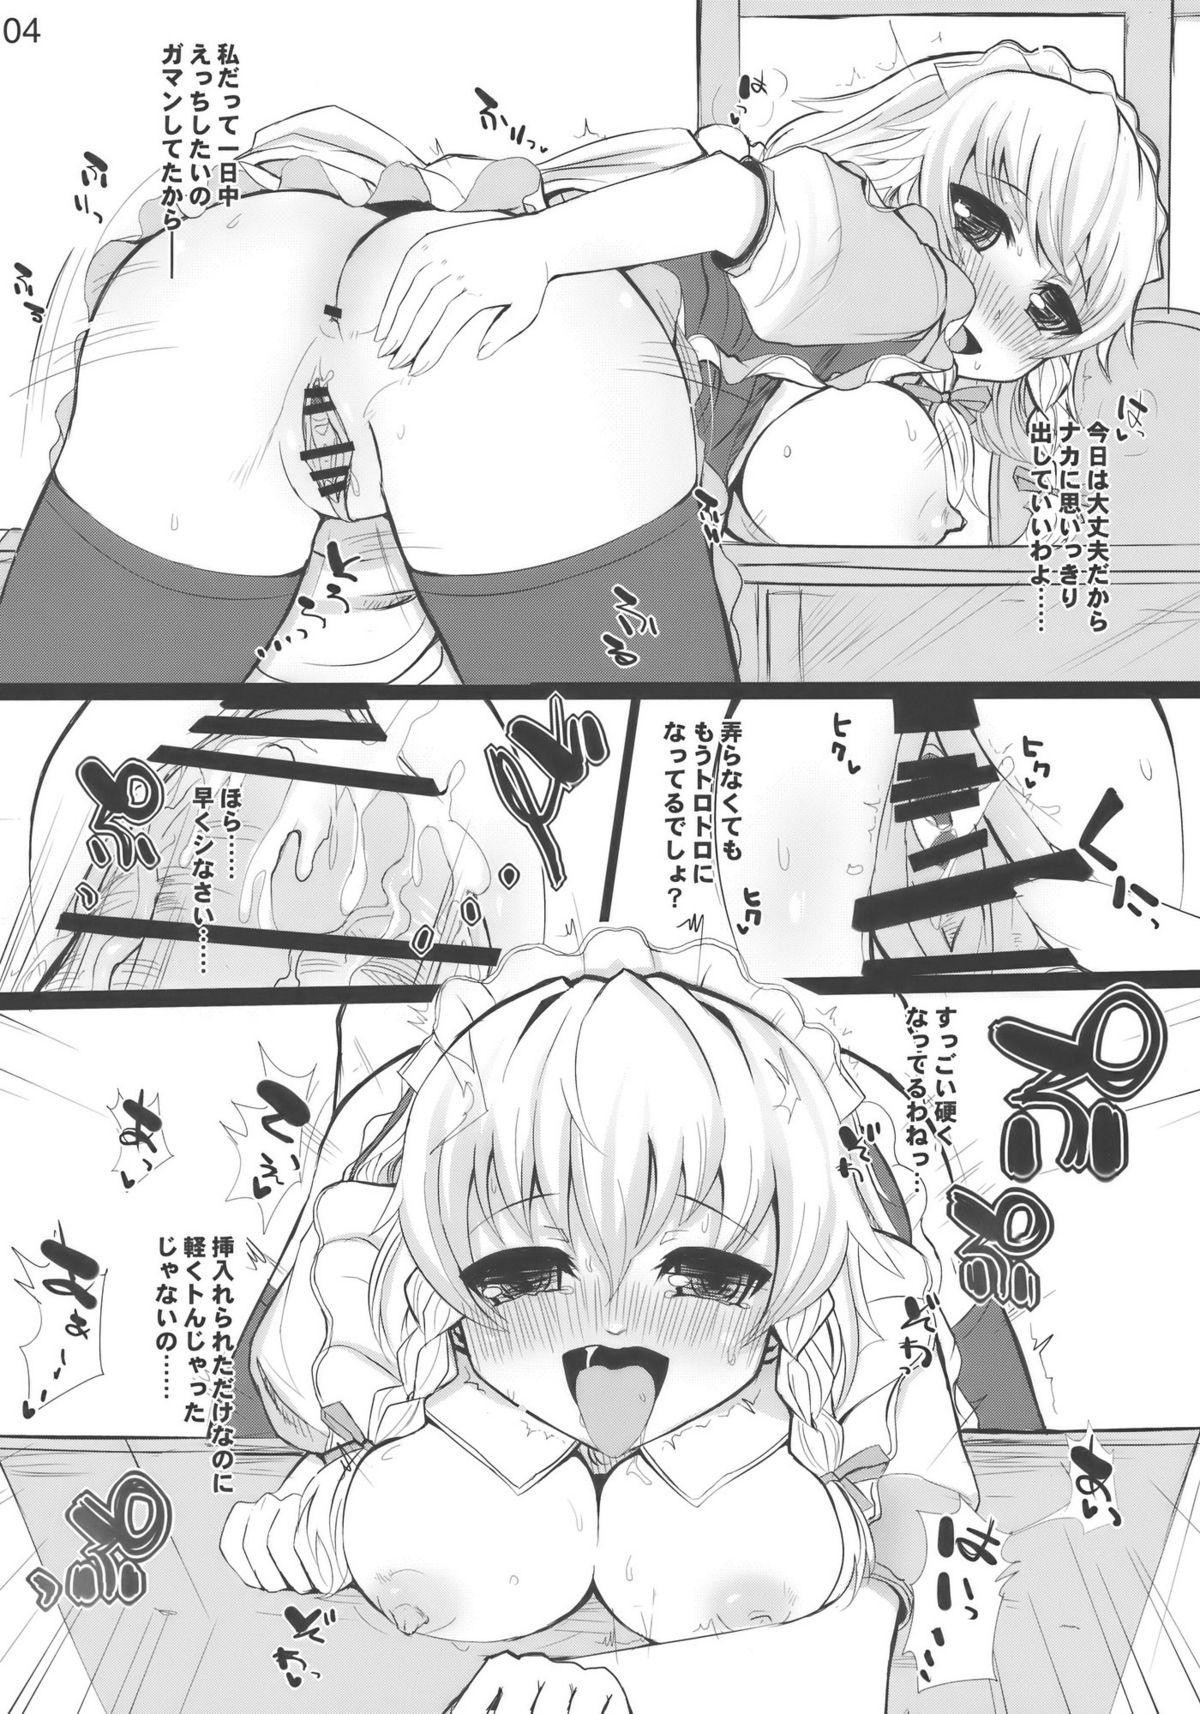 Female Domination Feed me with your Kiss - Touhou project Upskirt - Page 4